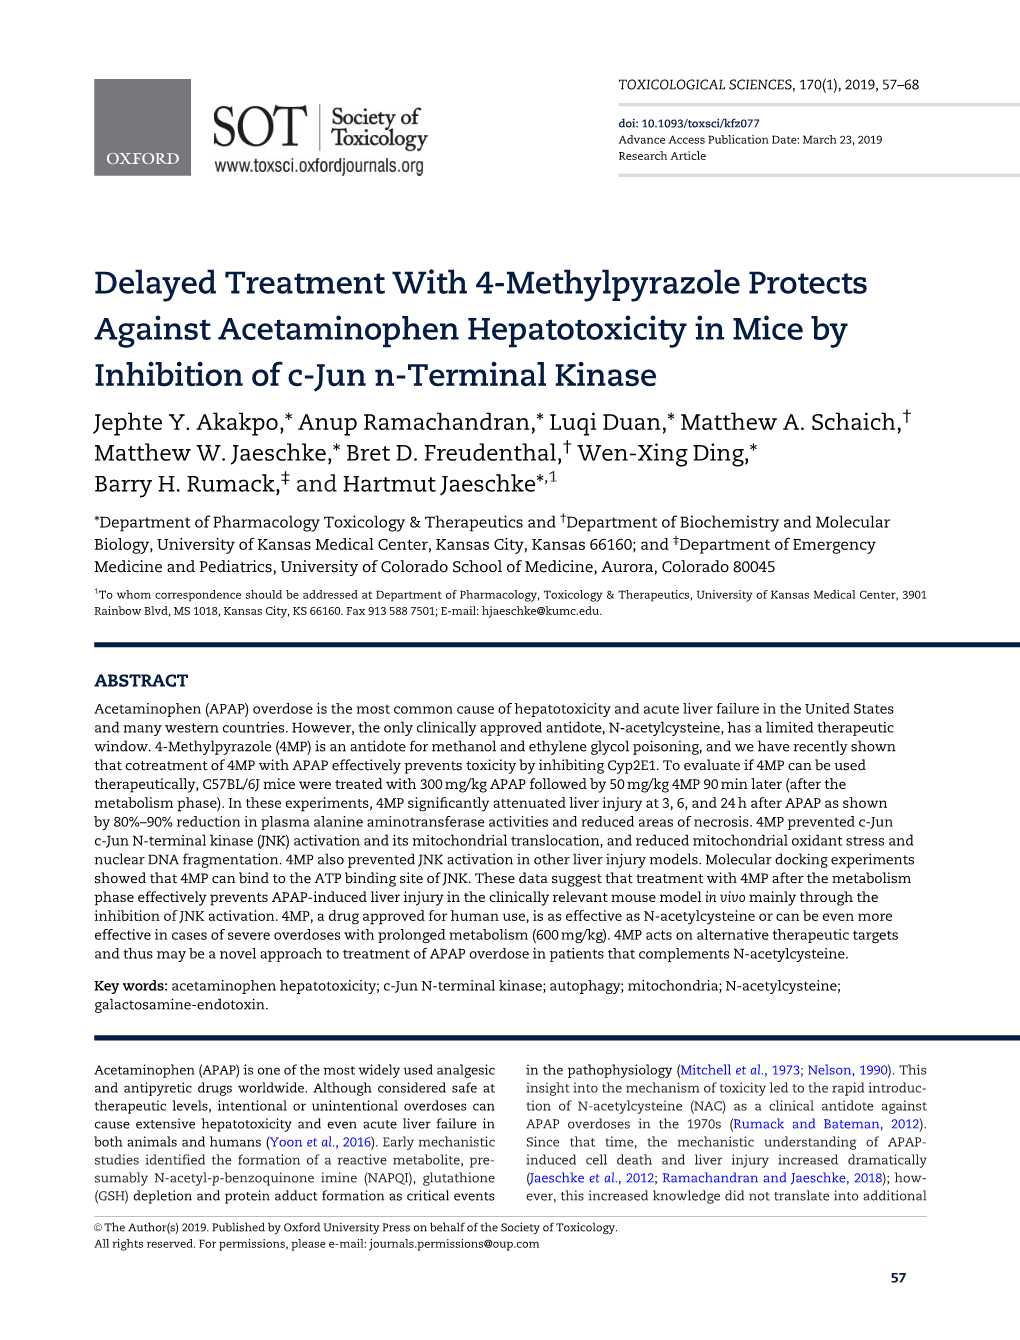 Delayed Treatment with 4-Methylpyrazole Protects Against Acetaminophen Hepatotoxicity in Mice by Inhibition of C-Jun N-Terminal Kinase Jephte Y